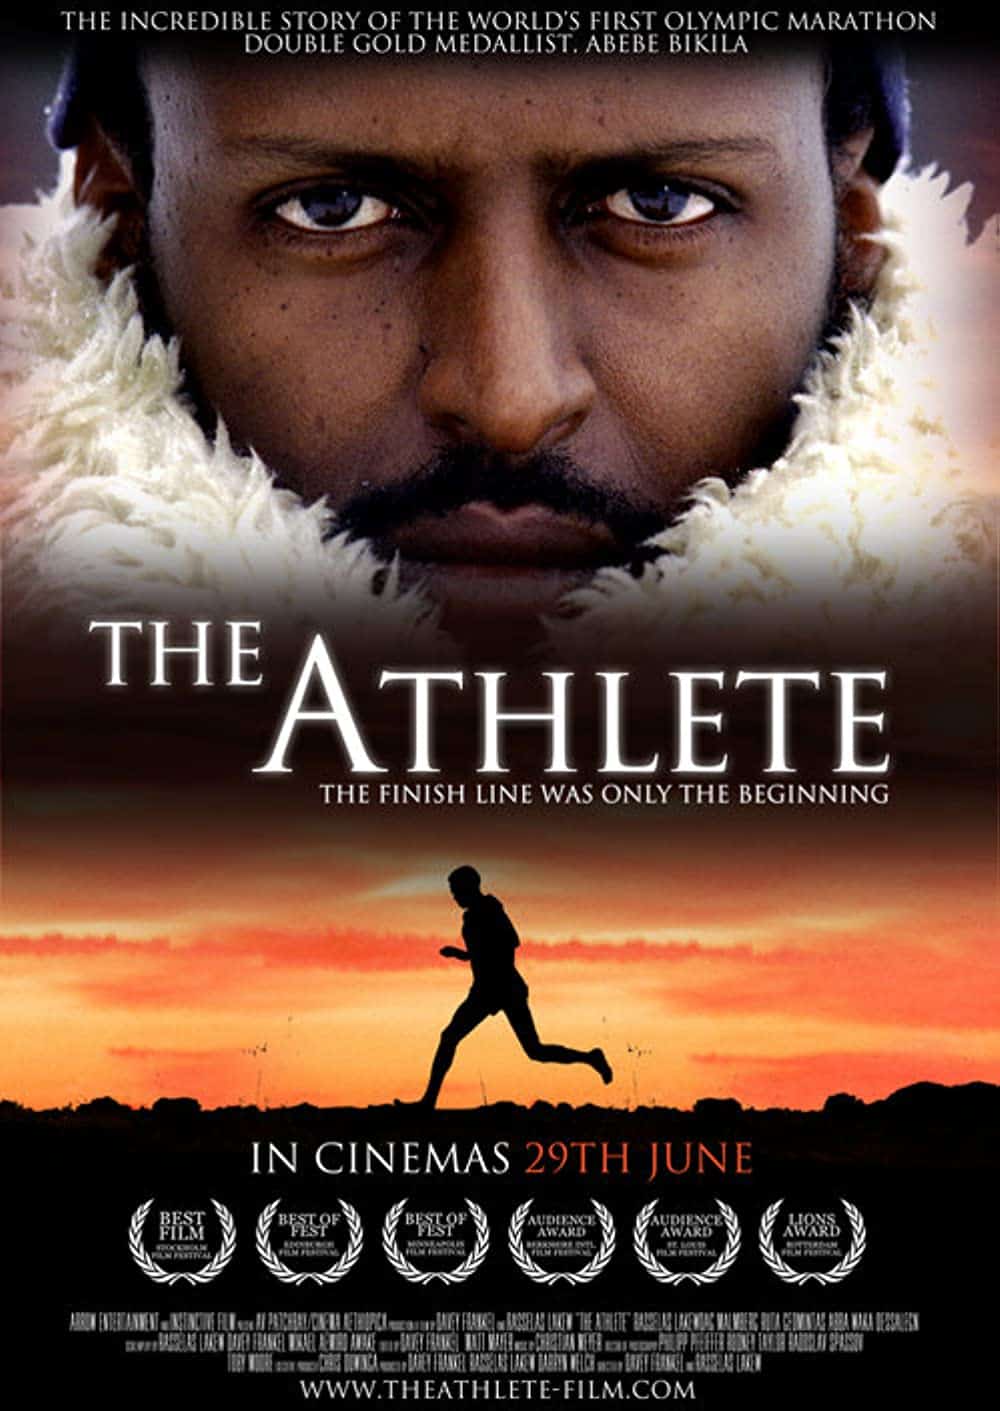 The Athlete (2009) 19 Best Running Movies You Can't Miss